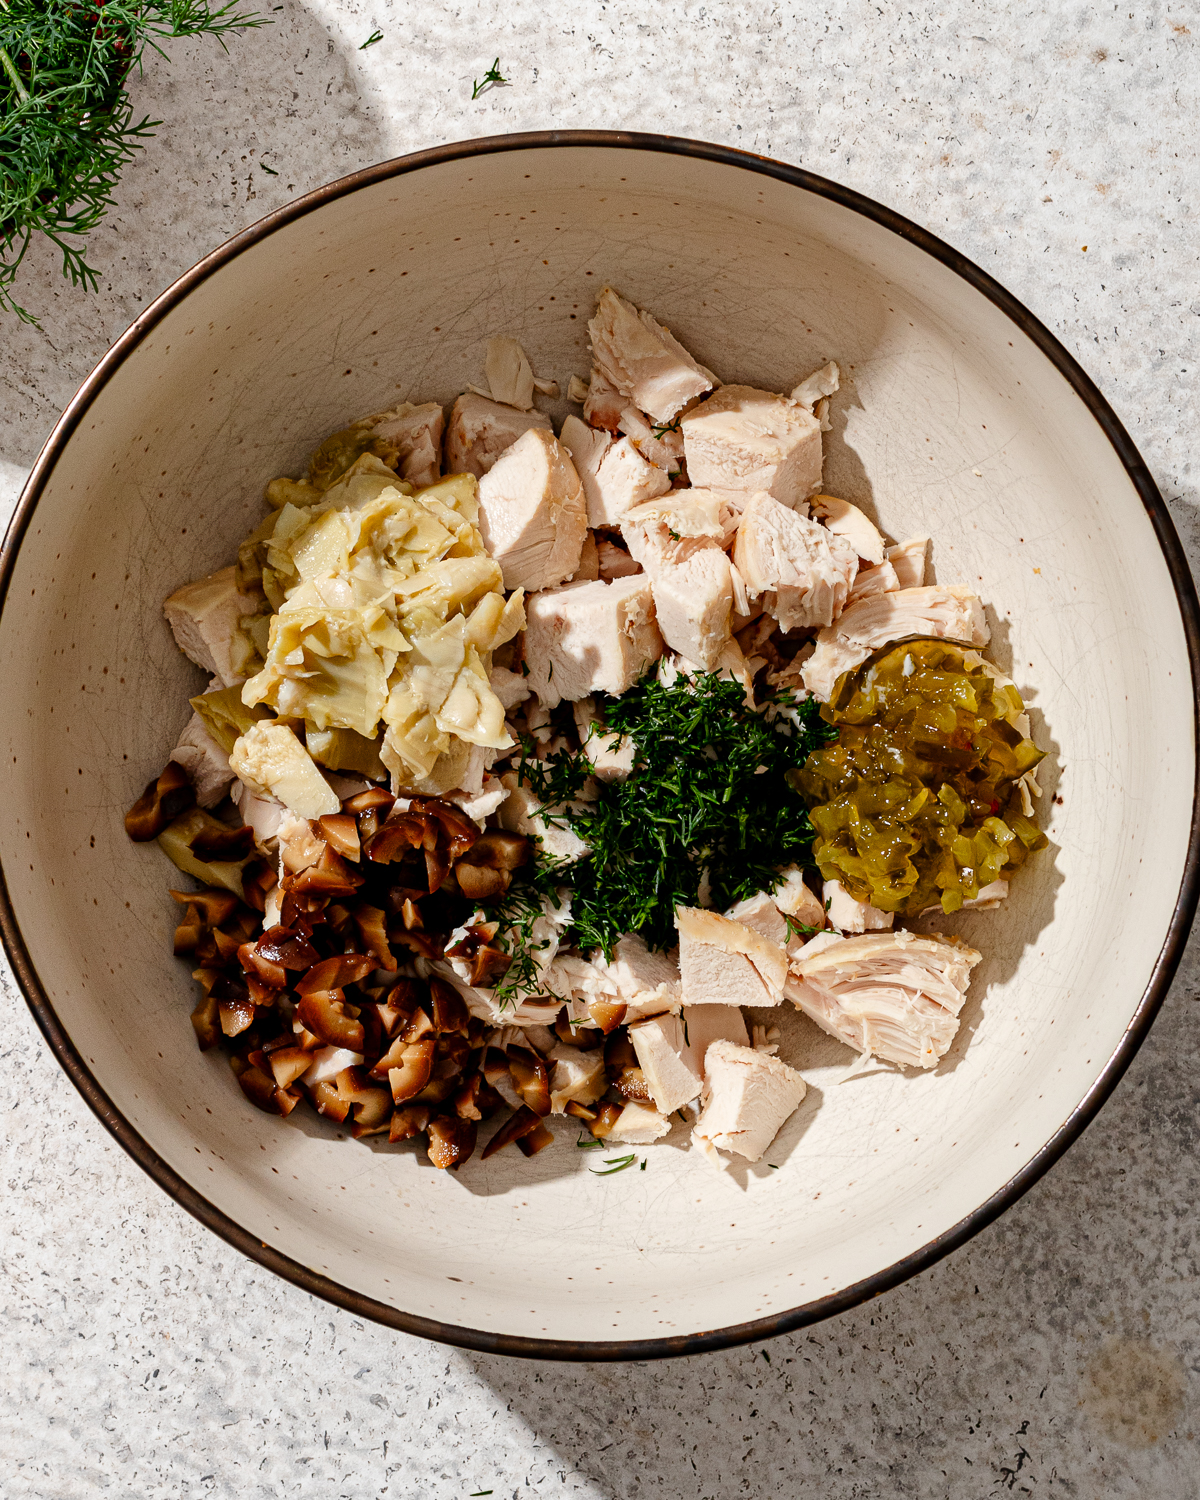 Ingredients for high protein chicken salad in a bowl.